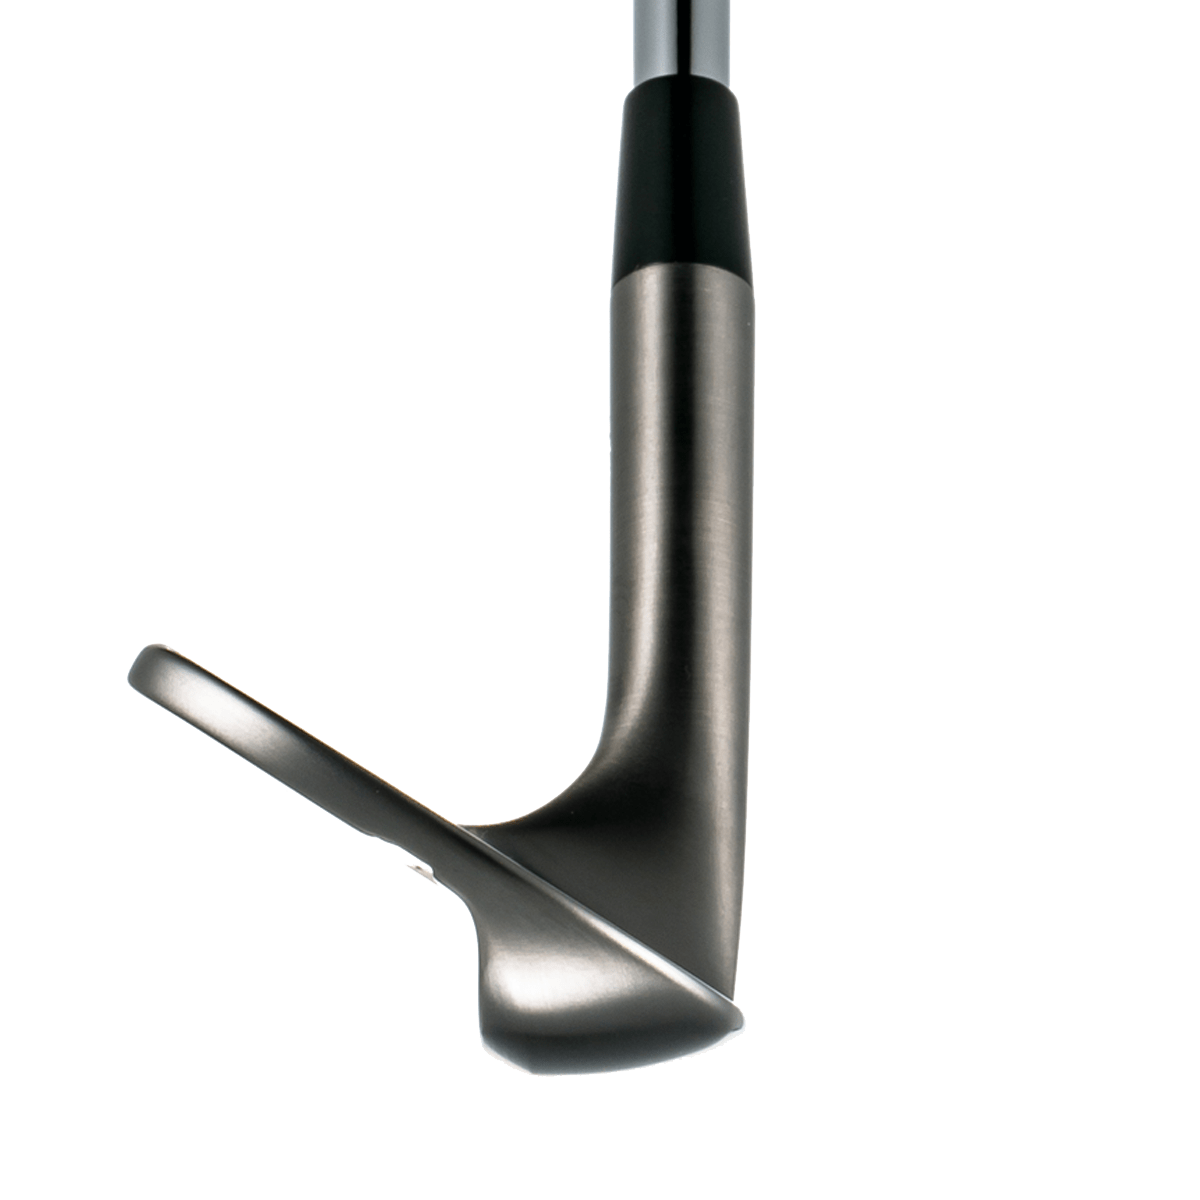 PROTOCONCEPT Golf, Forged Wedge - 25